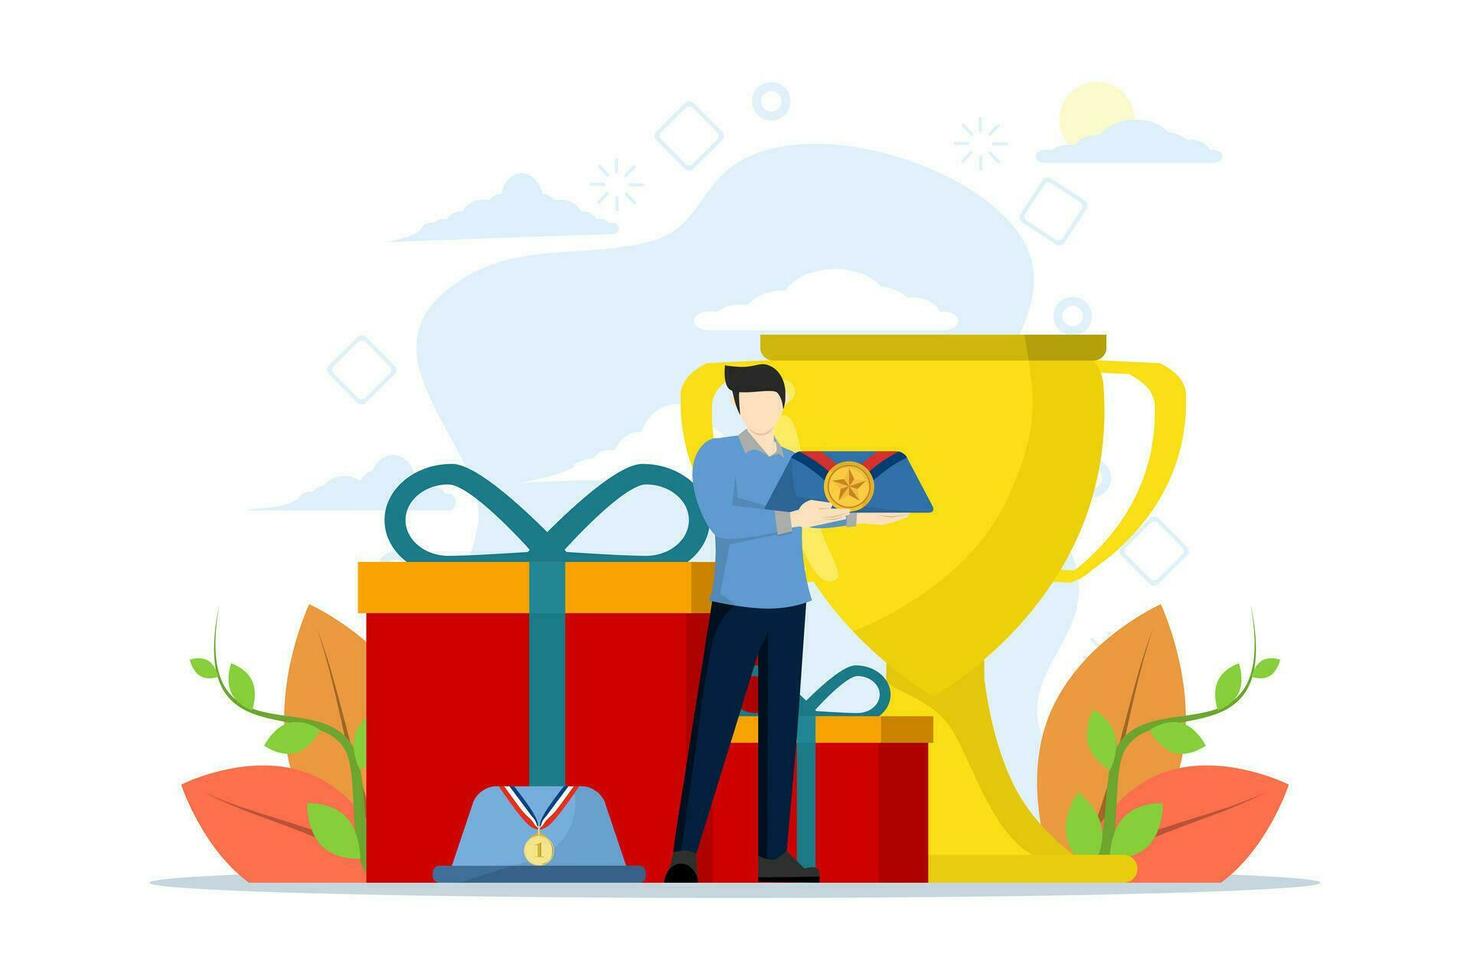 Concept of getting loyalty rewards, bonuses, business rewards. character standing and holding gold medal. Rewards program and receive gifts. Flat vector illustration on a white background.